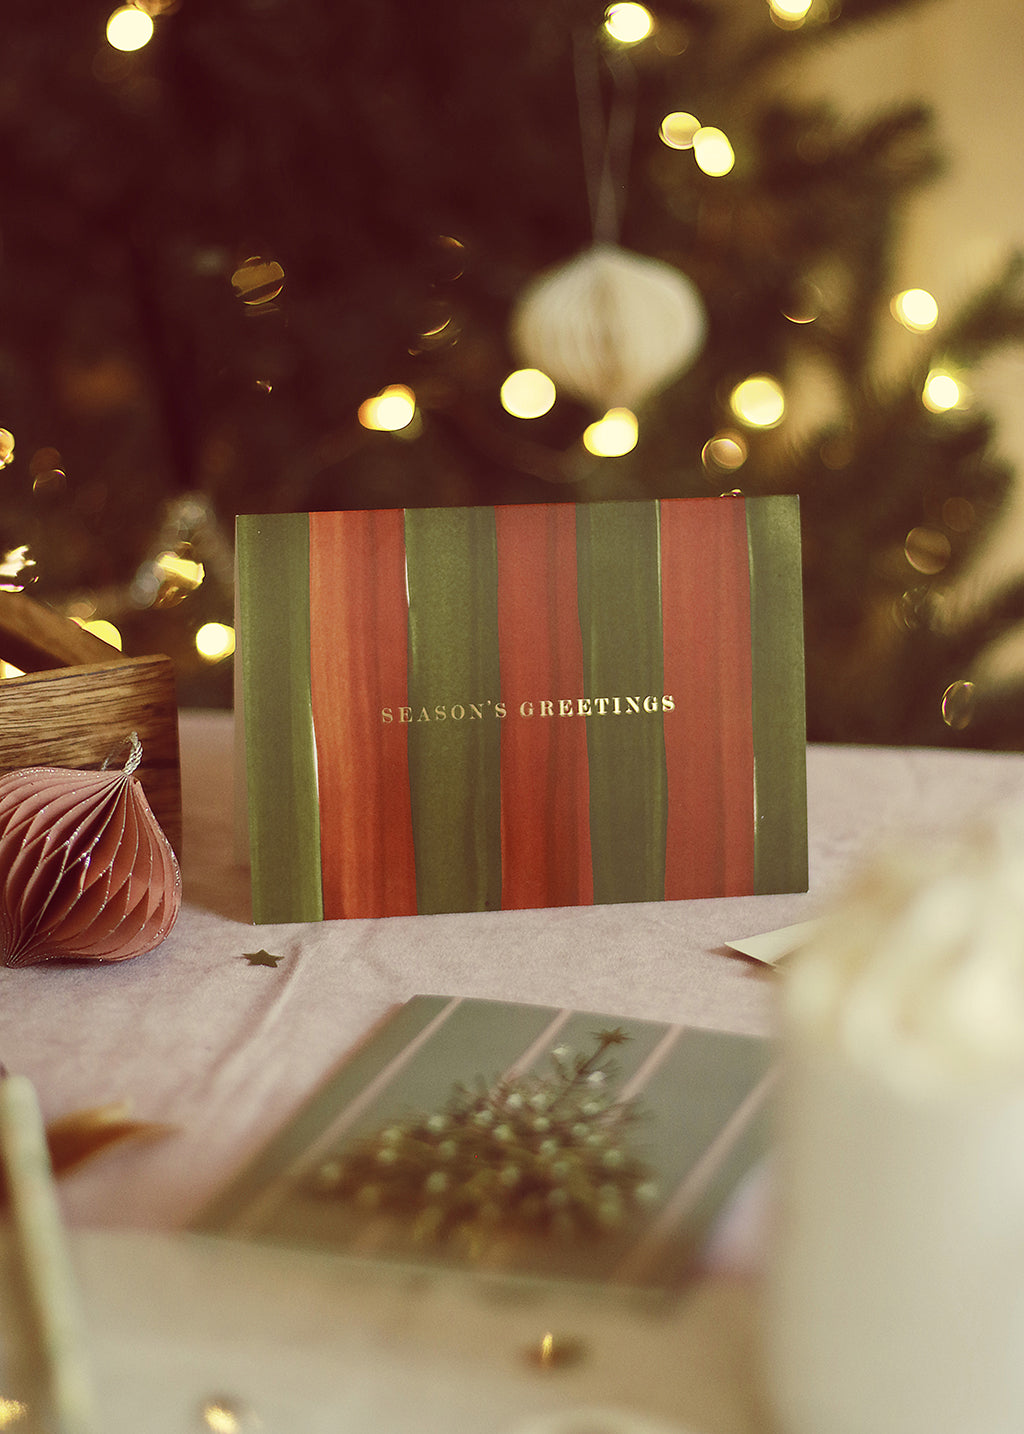 a red and green christmas card with handpainted stripes. Reads "seasons greetings" in gold foil